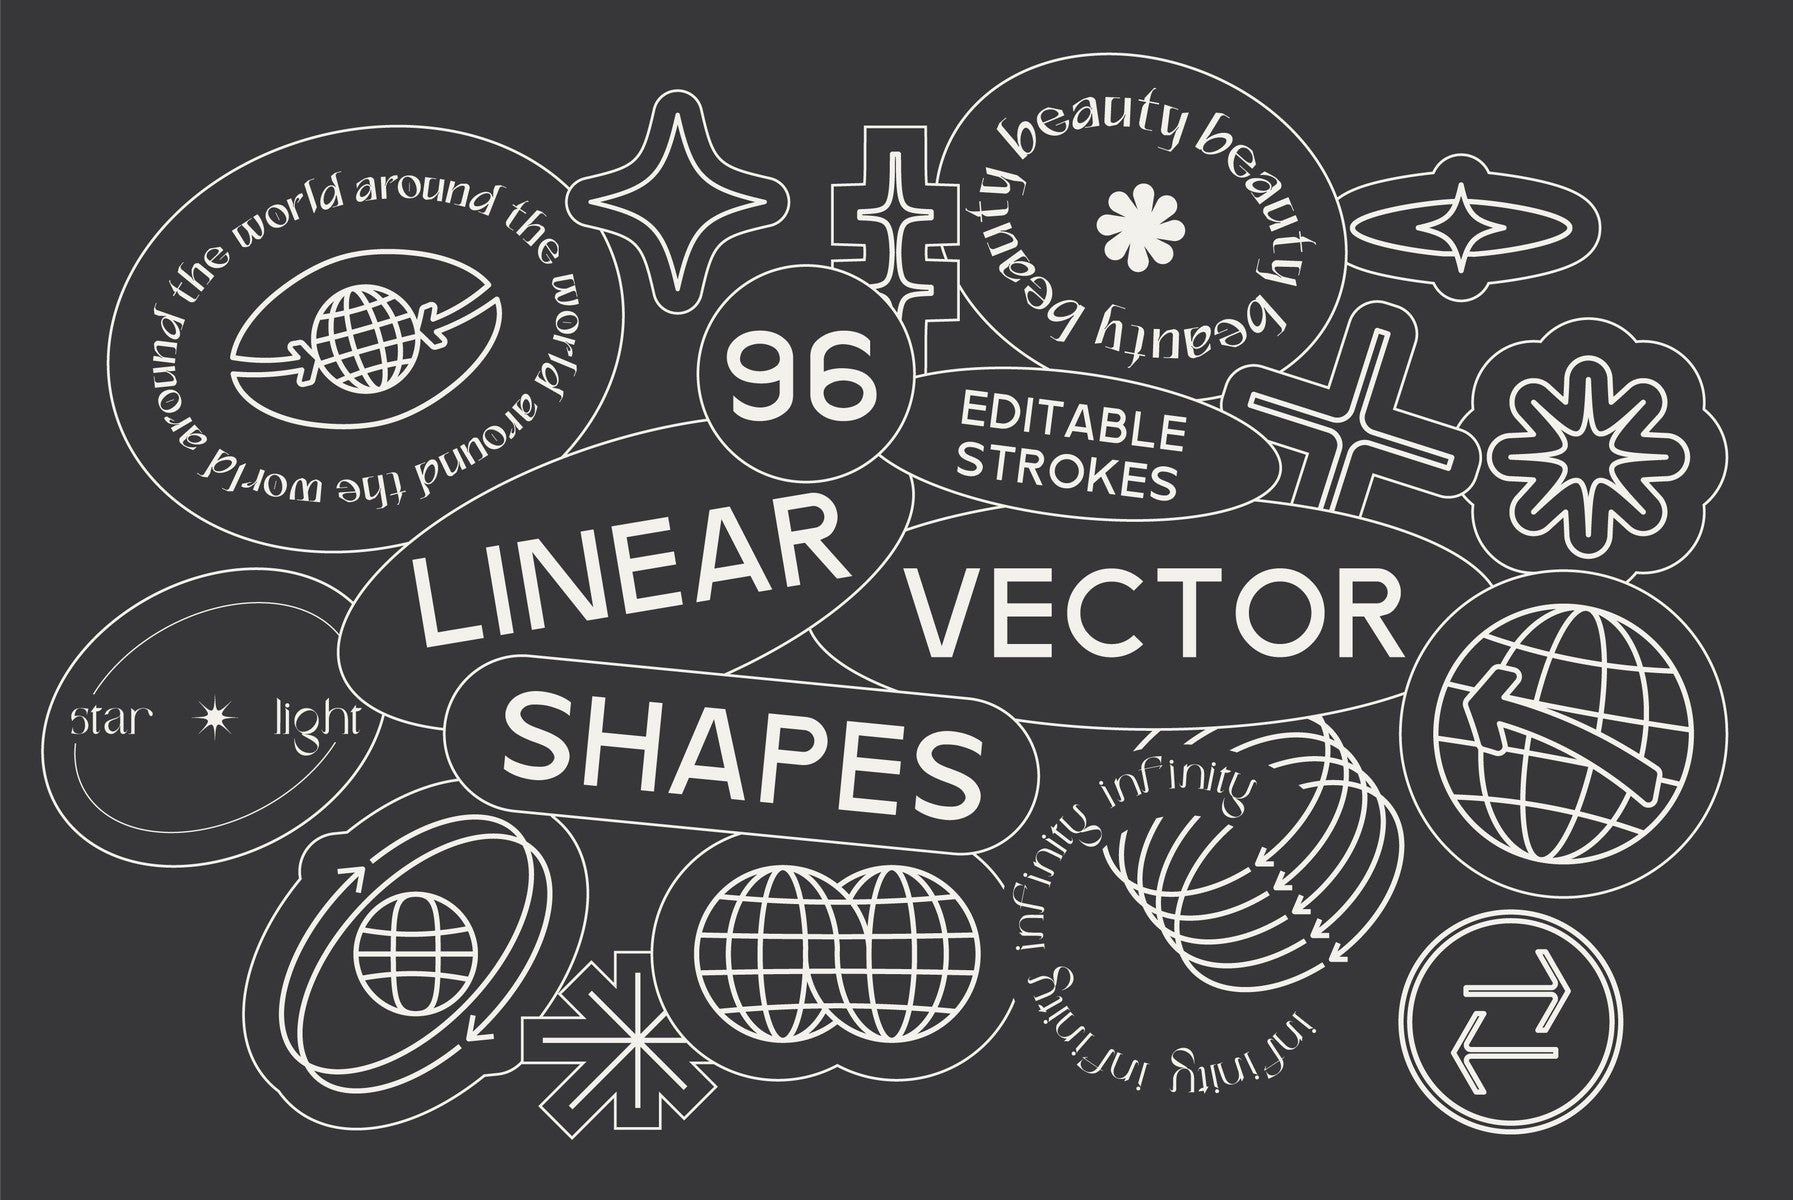 96 Linear Vector Shapes - Part 1